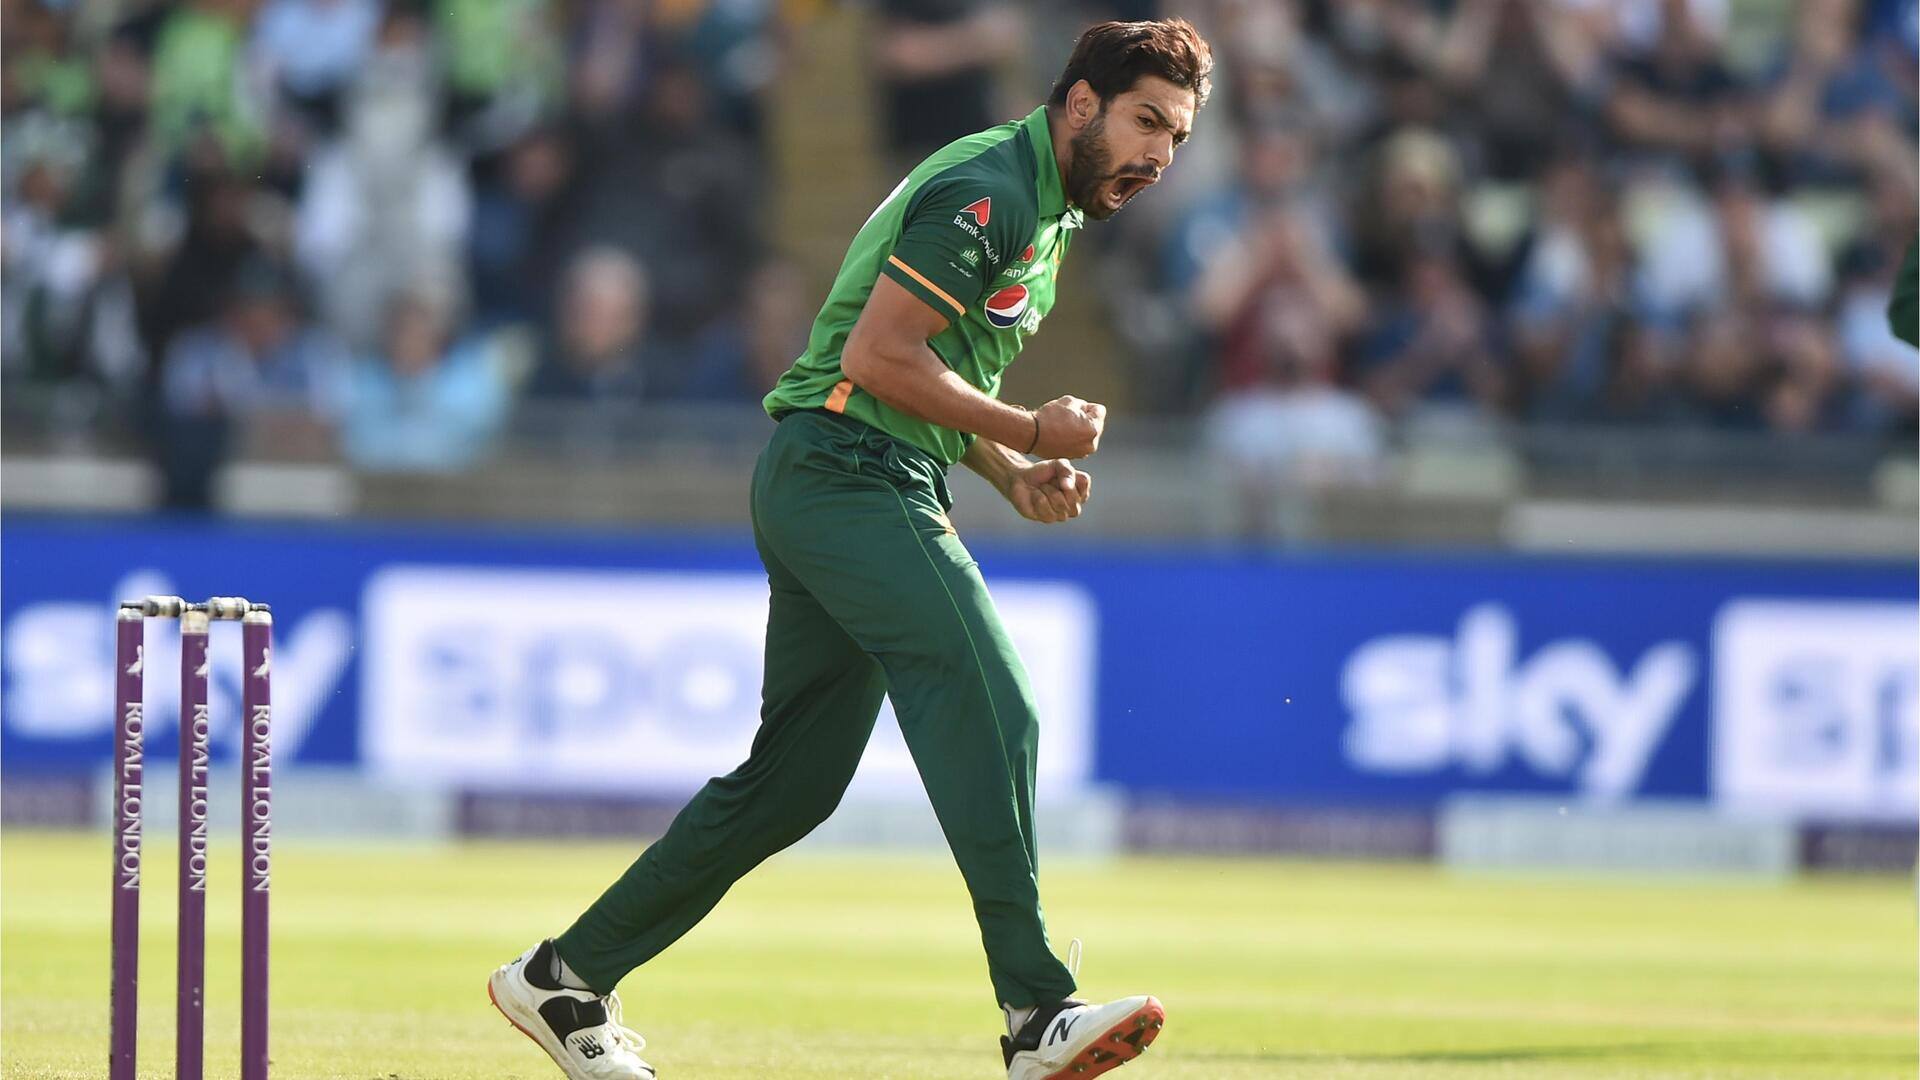 Haris Rauf becomes joint third-fastest to 50 ODI wickets (Pakistan)